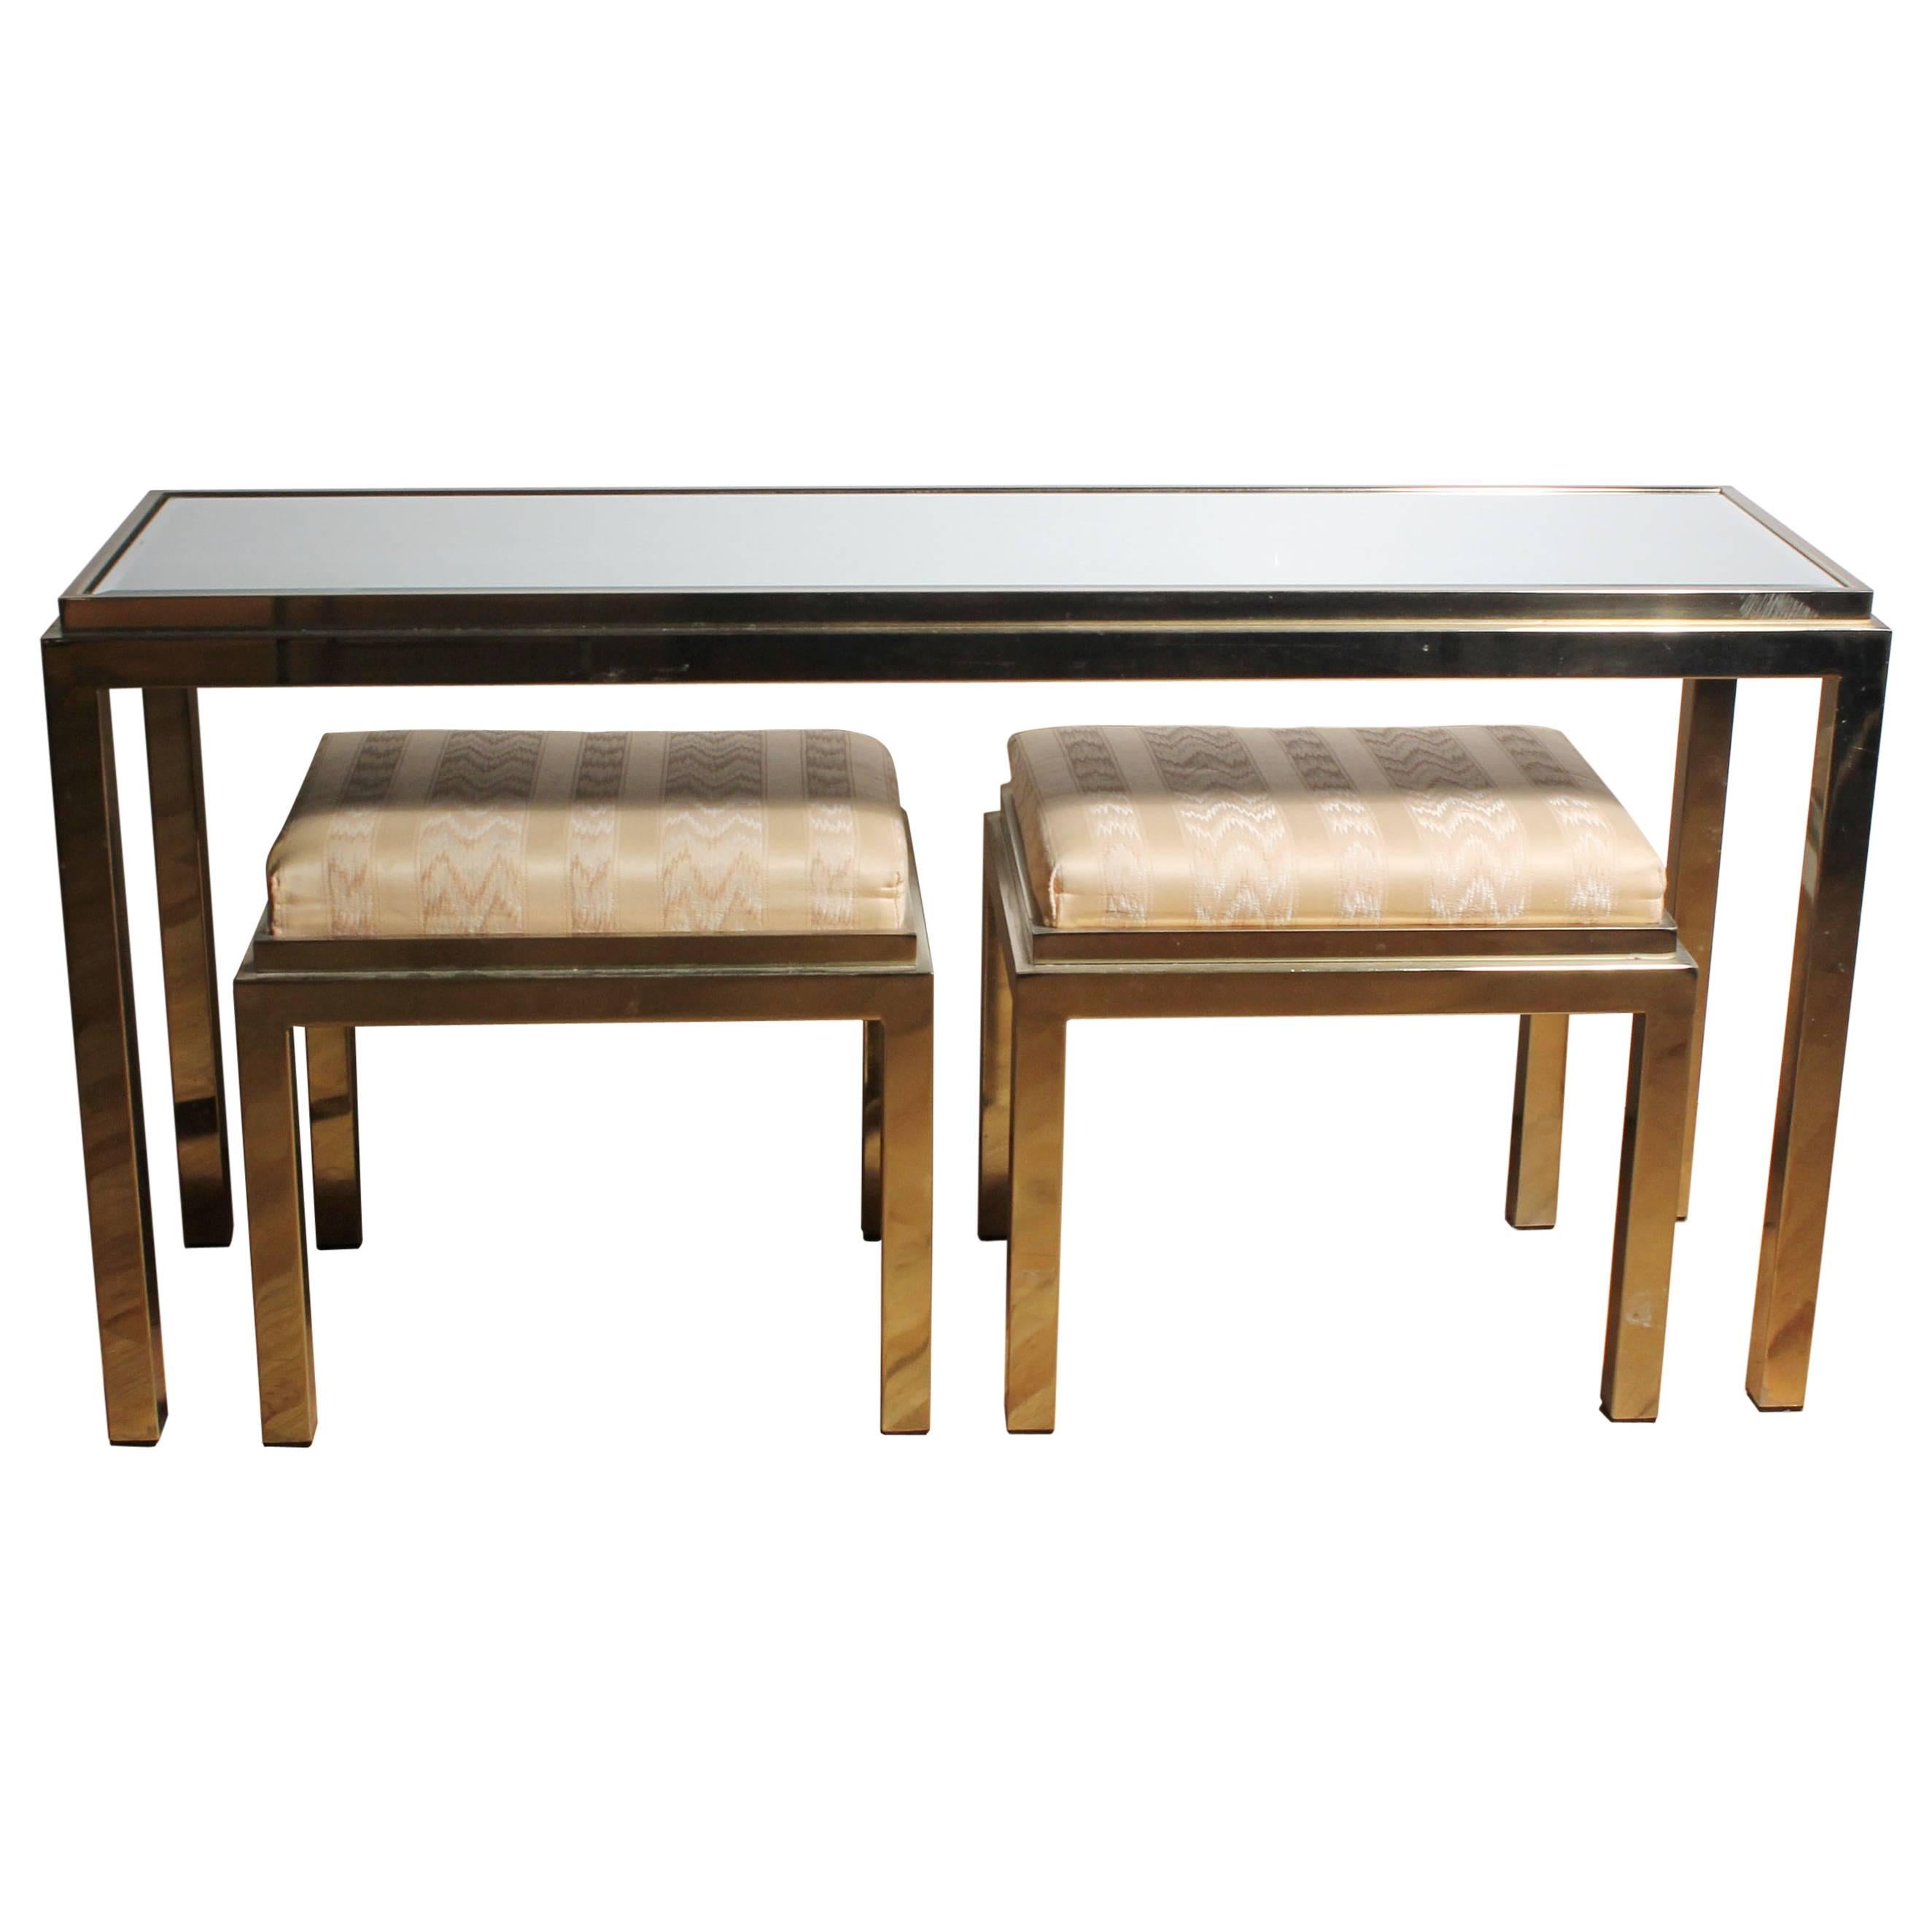 Brass Console Sofa Table with Matching Stools in Style of Milo Baughman